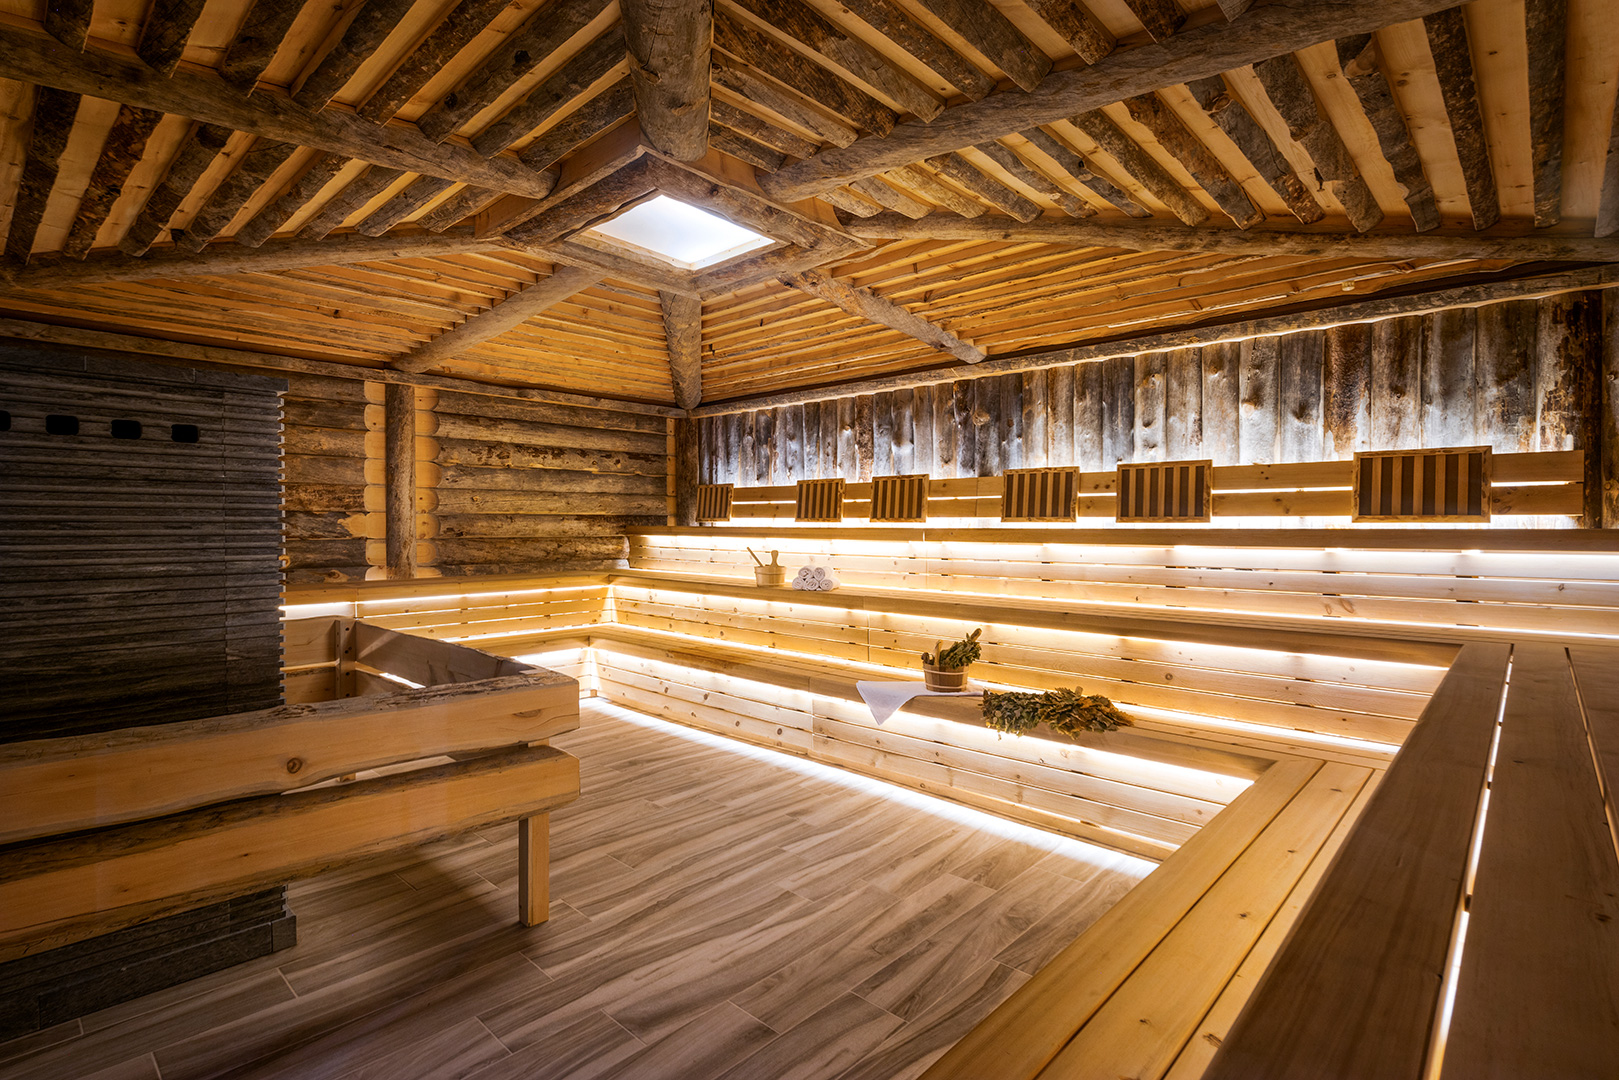 This image shows the interior of a traditional sauna room. The space is characterized by its rustic charm, with walls and ceilings made of raw, exposed logs creating a cabin-like feel. Wooden benches are arranged in tiers along the walls, providing seating. There's a soft, natural light coming through a skylight in the center of the ceiling, and LED strips under the benches add a modern touch. A sauna heater made of stacked stones is situated in one corner, and there are wooden buckets and ladles, likely for pouring water on the hot stones to create steam.